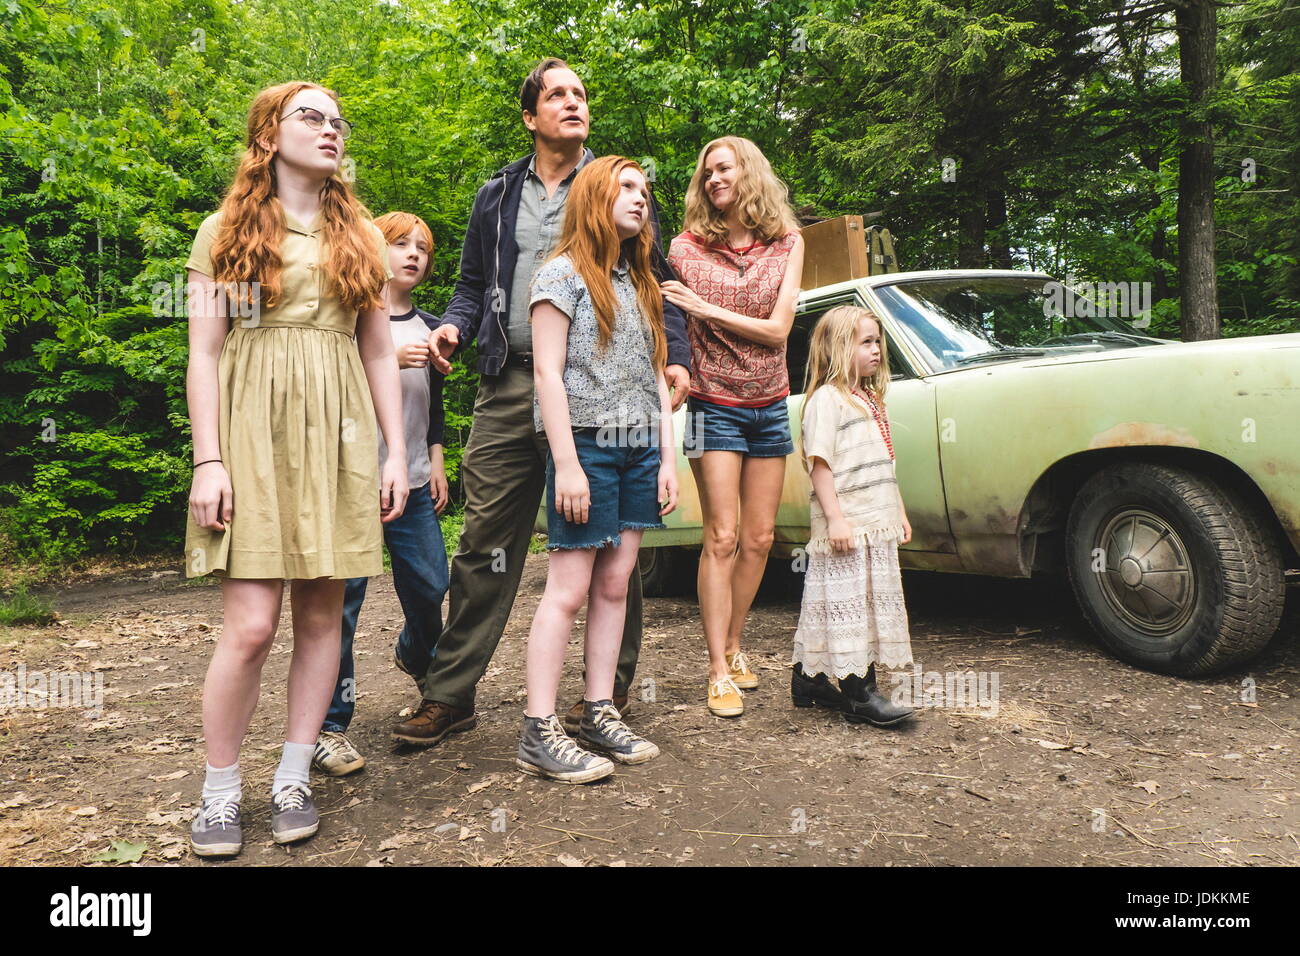 RELEASE DATE: 2017 TITLE: The Glass Castle STUDIO: DIRECTOR: Destin Cretton PLOT: A young girl comes of age in a dysfunctional family of nonconformist nomads with a mother who's an eccentric artist and an alcoholic father who would stir the children's imagination with hope as a distraction to their poverty STARRING: Sadie Sink, Charlie Shotwell, Woody Harrelson, Ella Anderson, Naomi Watts, Eden Grace Redfield. (Credit: © Lionsgate/Entertainment Pictures) Stock Photo